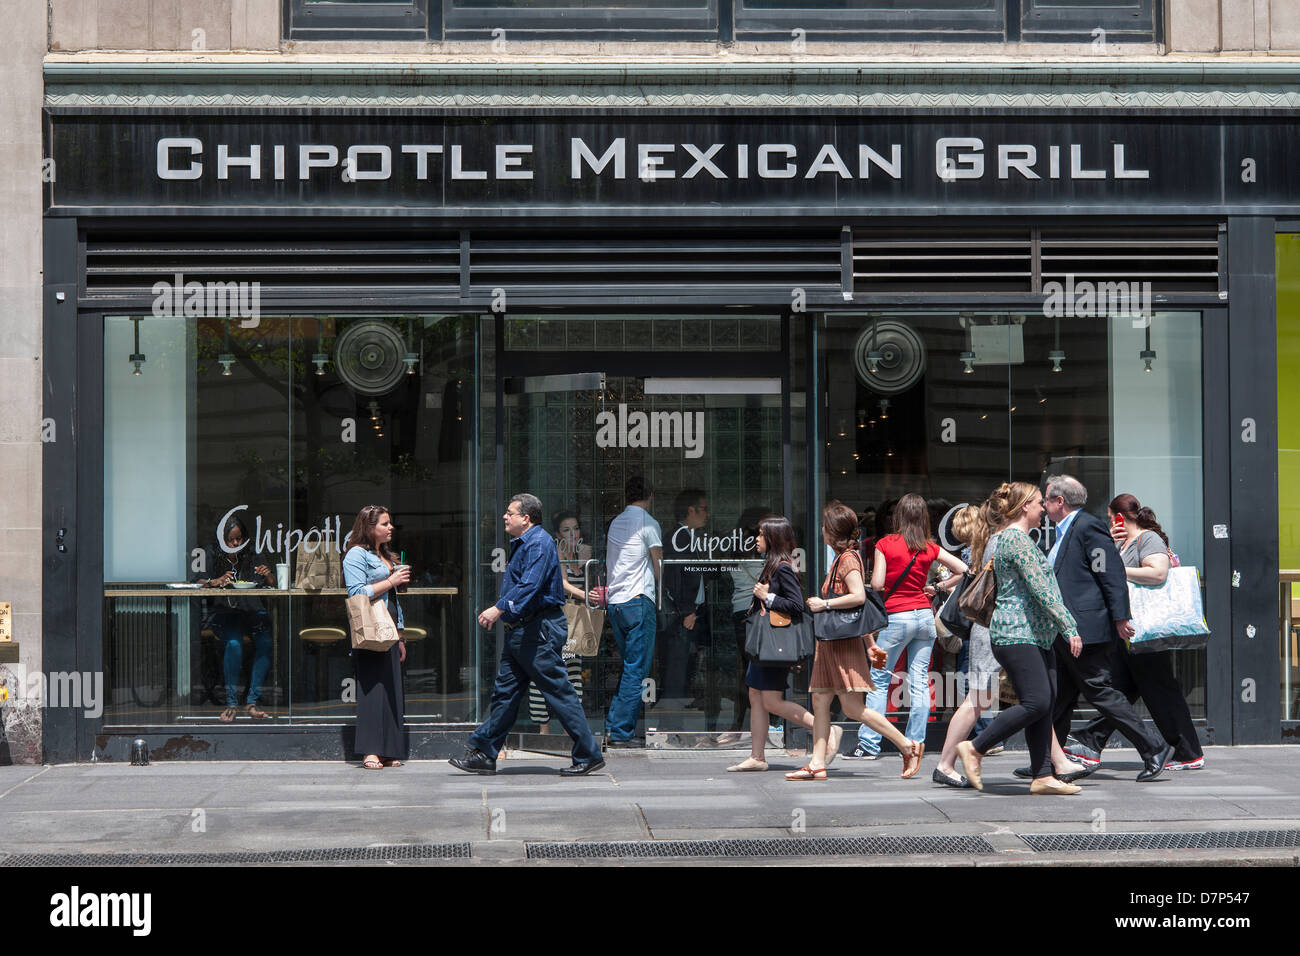 A Chipotle Mexican Grill restaurant in Midtown Manhattan in New York on Friday, May 10, 2013. (© Richard B. Levine) Stock Photo